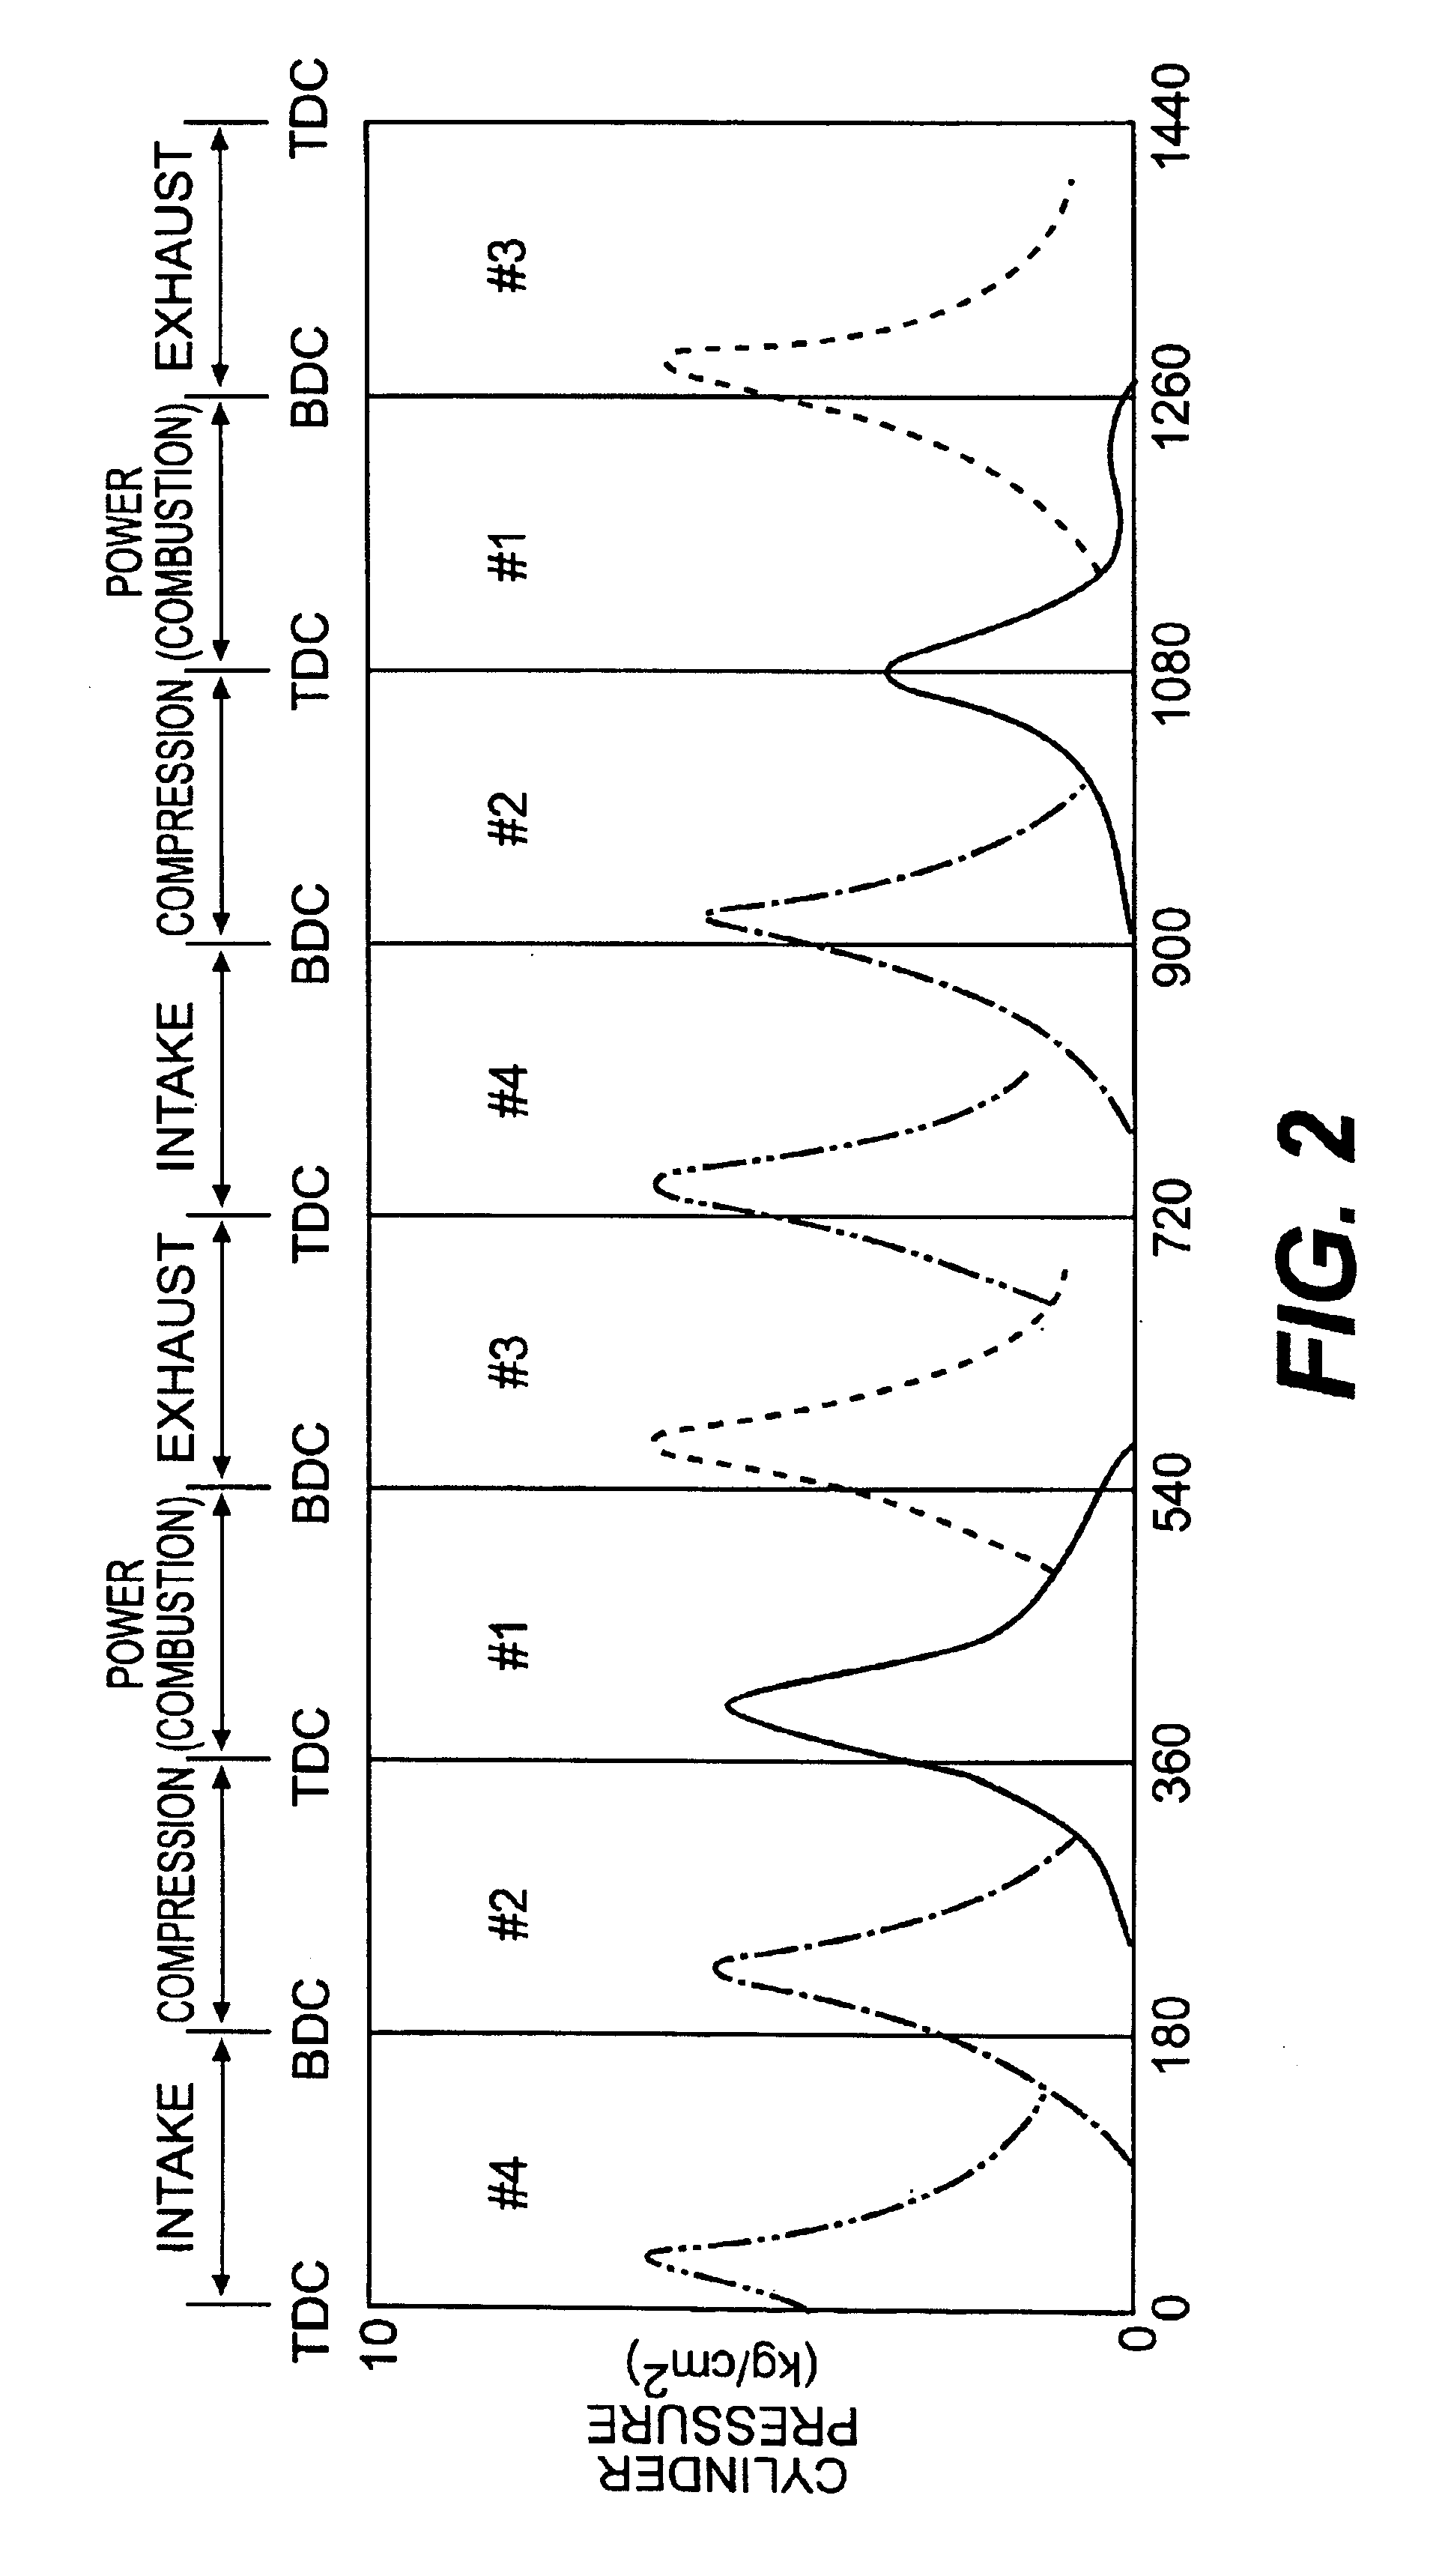 System and method for diagnosing and calibrating internal combustion engines